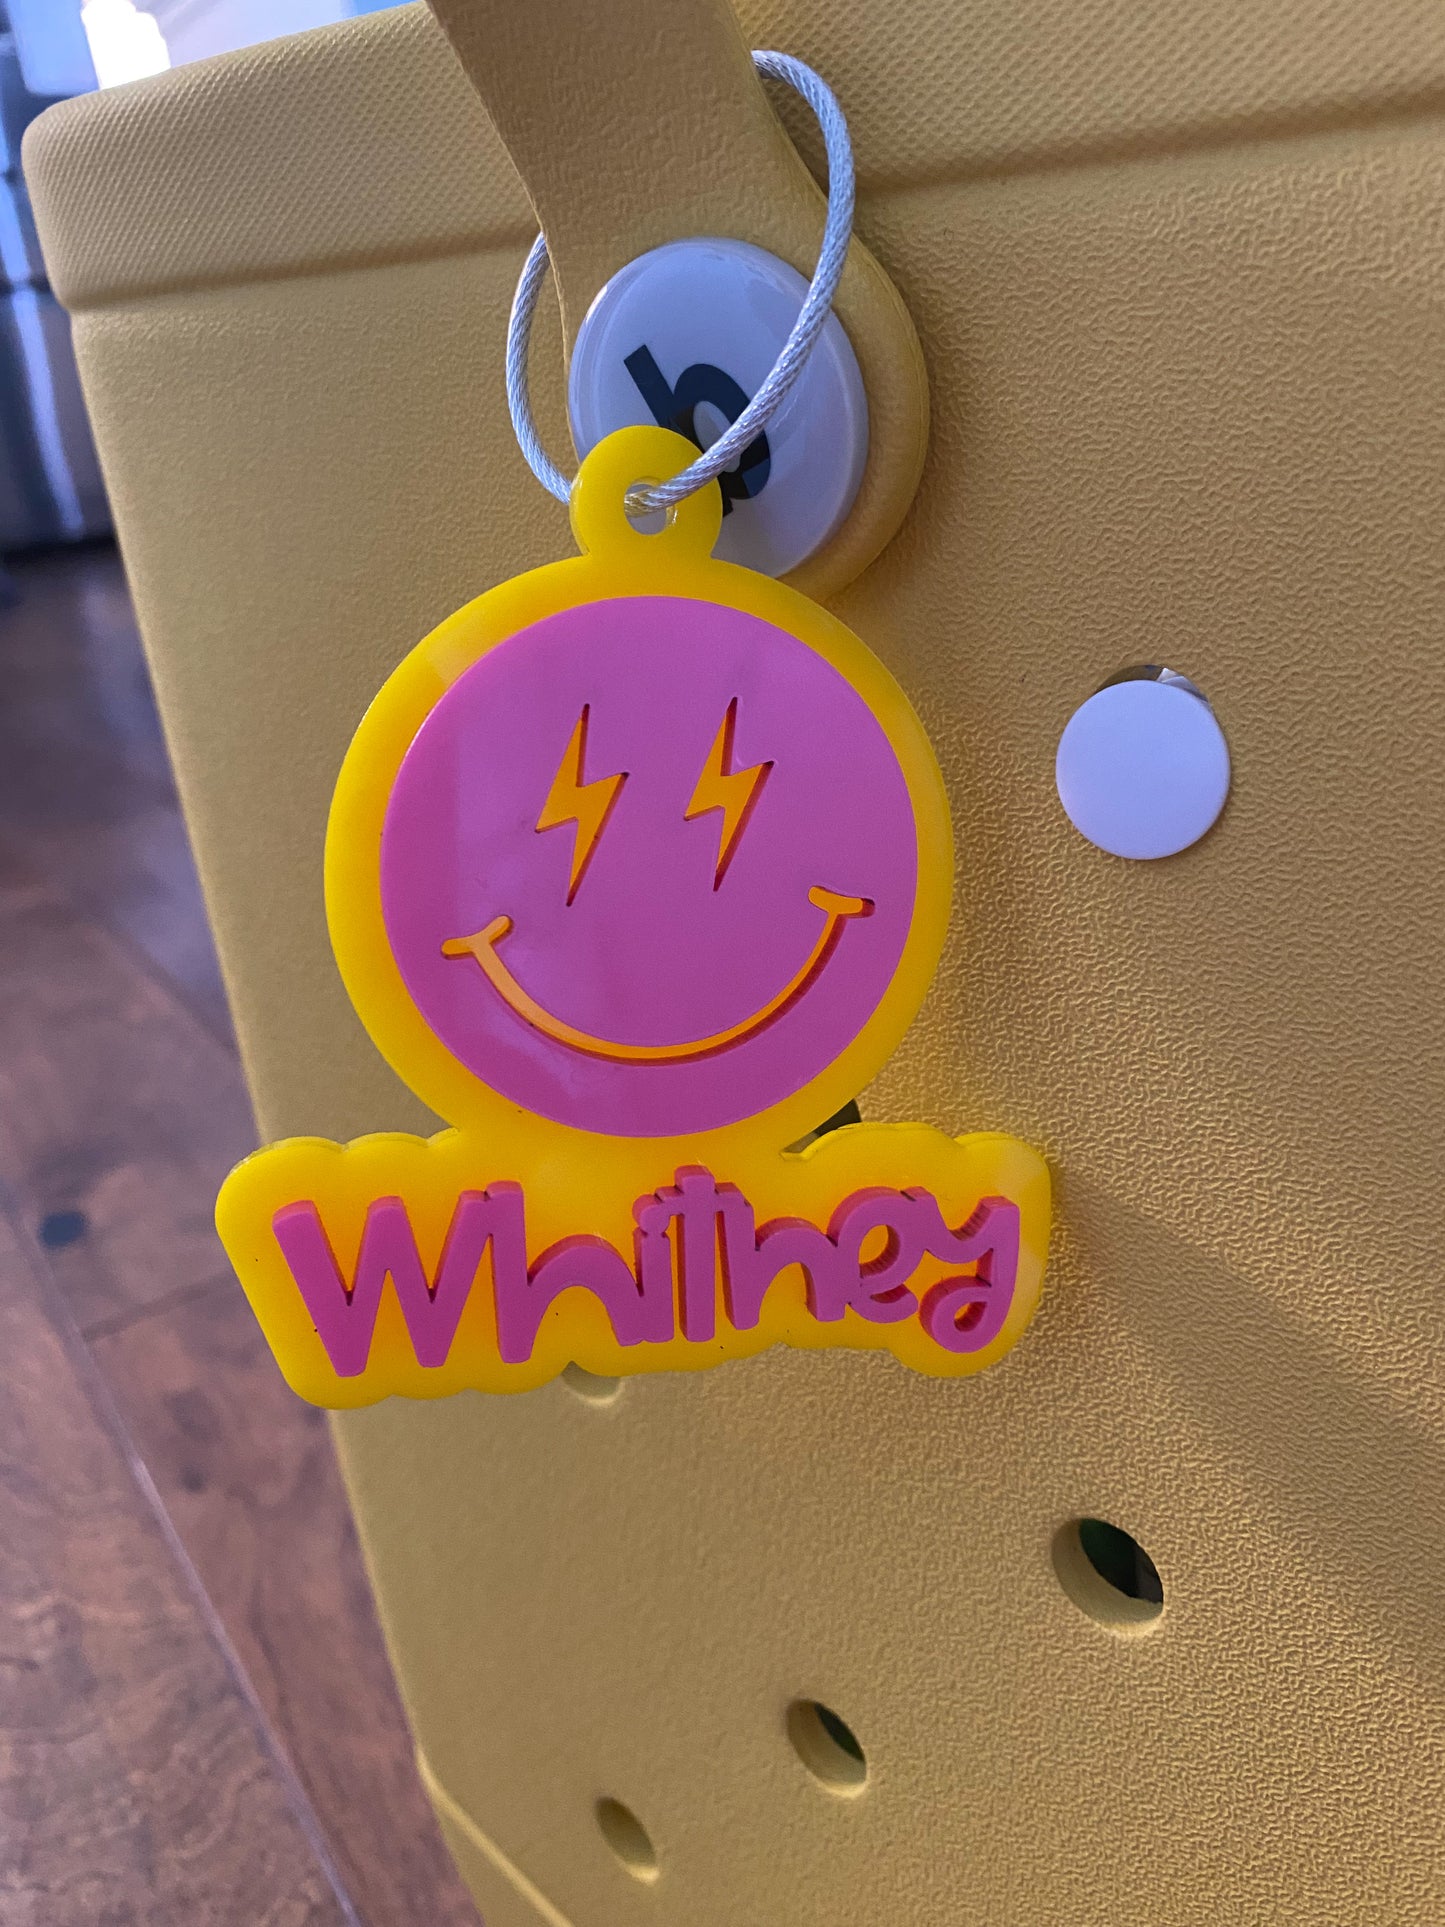 Smiley Face Lightning Bolt Personalized Acrylic Name Tag